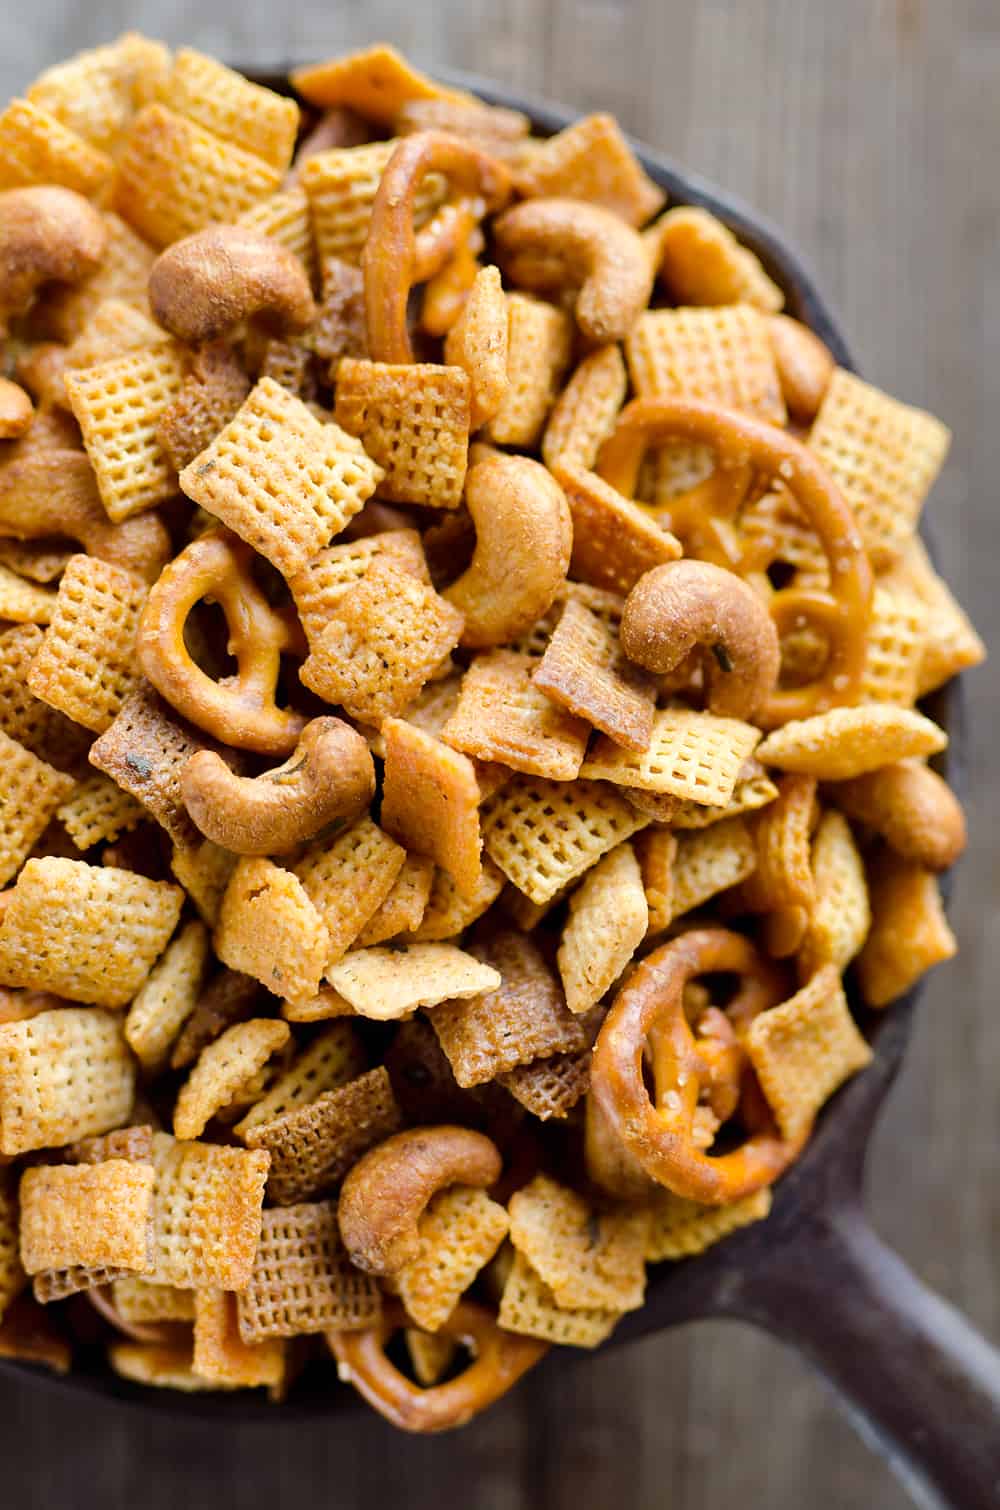 Buffalo Ranch Snack Mix is an easy treat perfect for the big game or holidays. Chex Mix is combined with pretzels and cashews and tossed in a spicy buffalo ranch sauce for a twist on your traditional snack mix. 